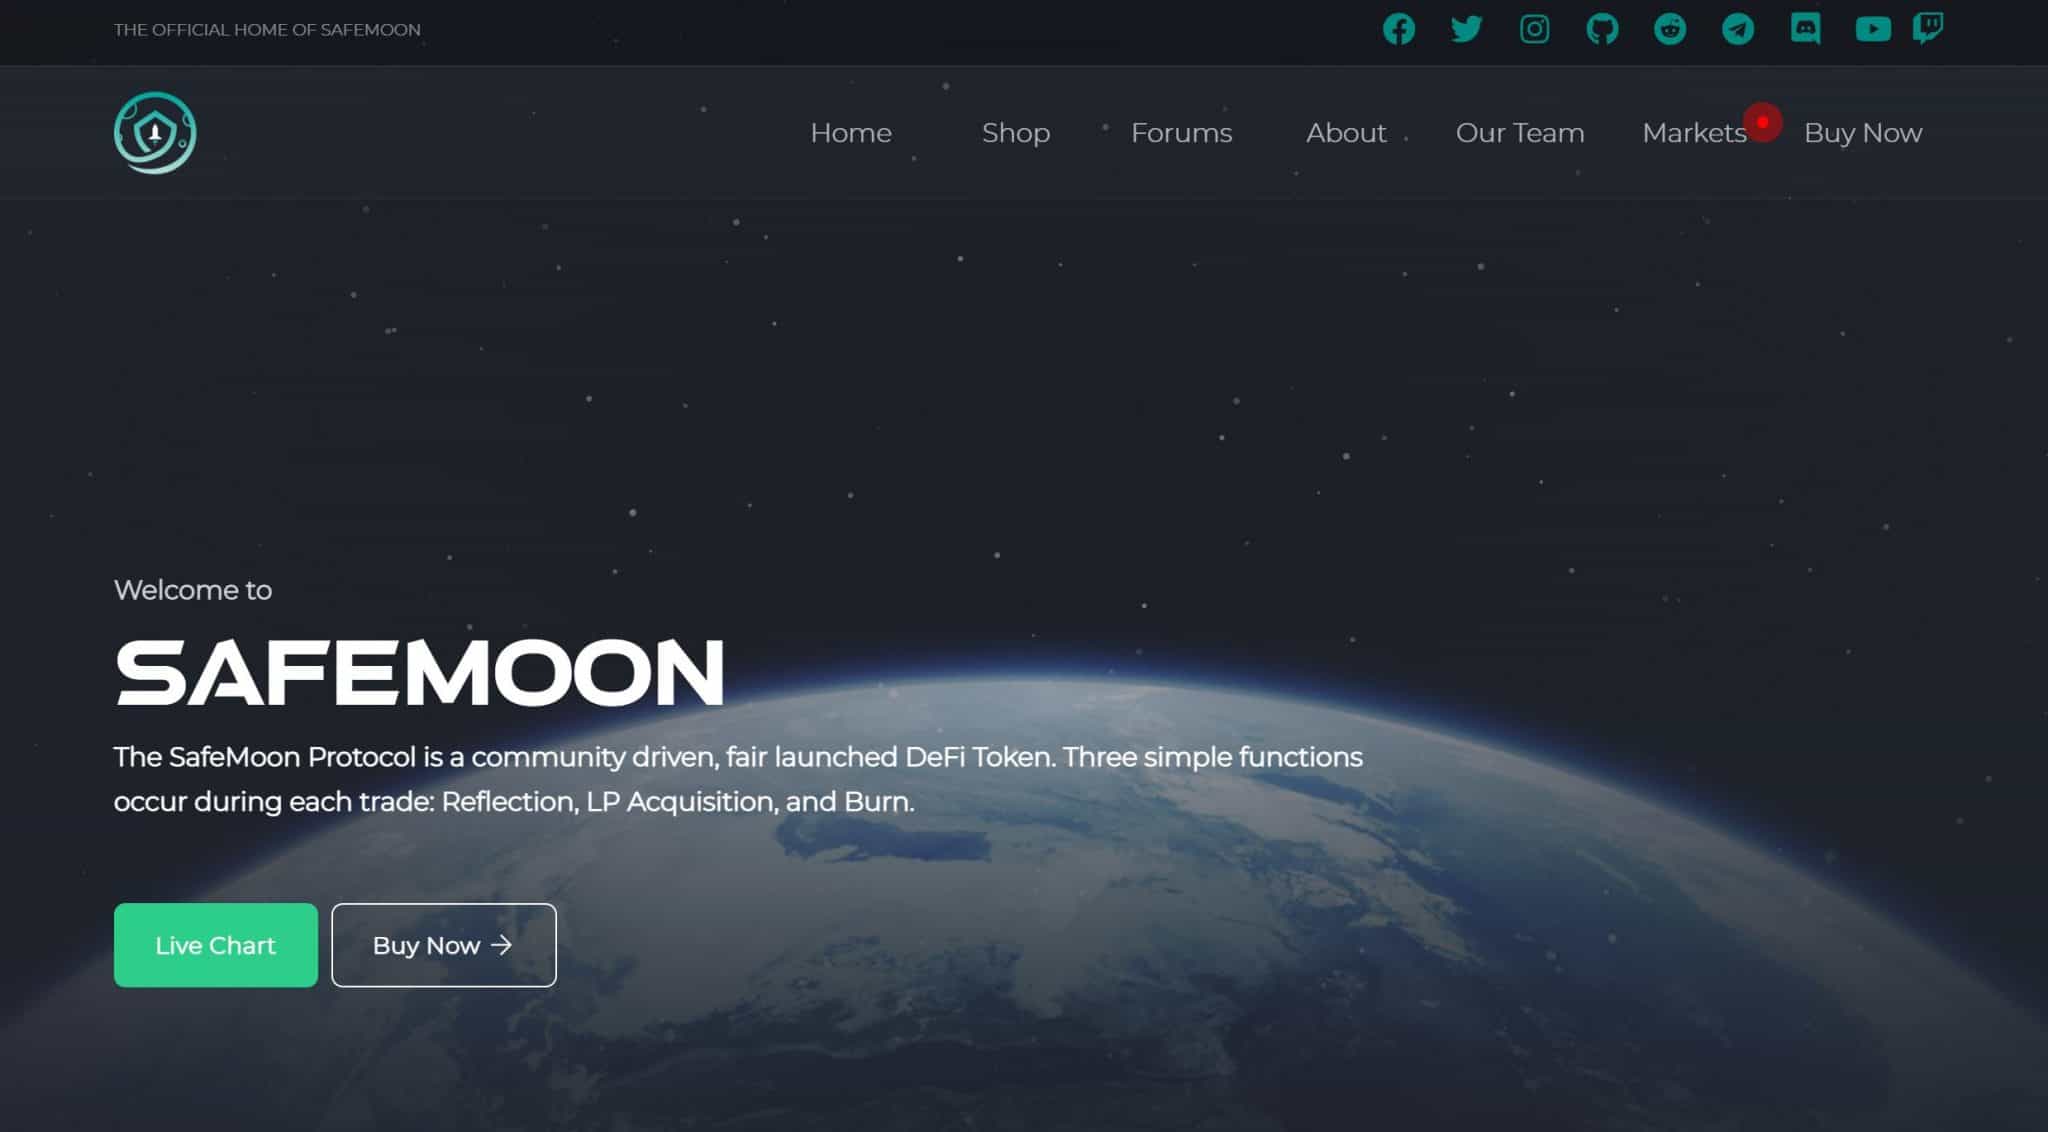 how to buy safemoon bitcoin